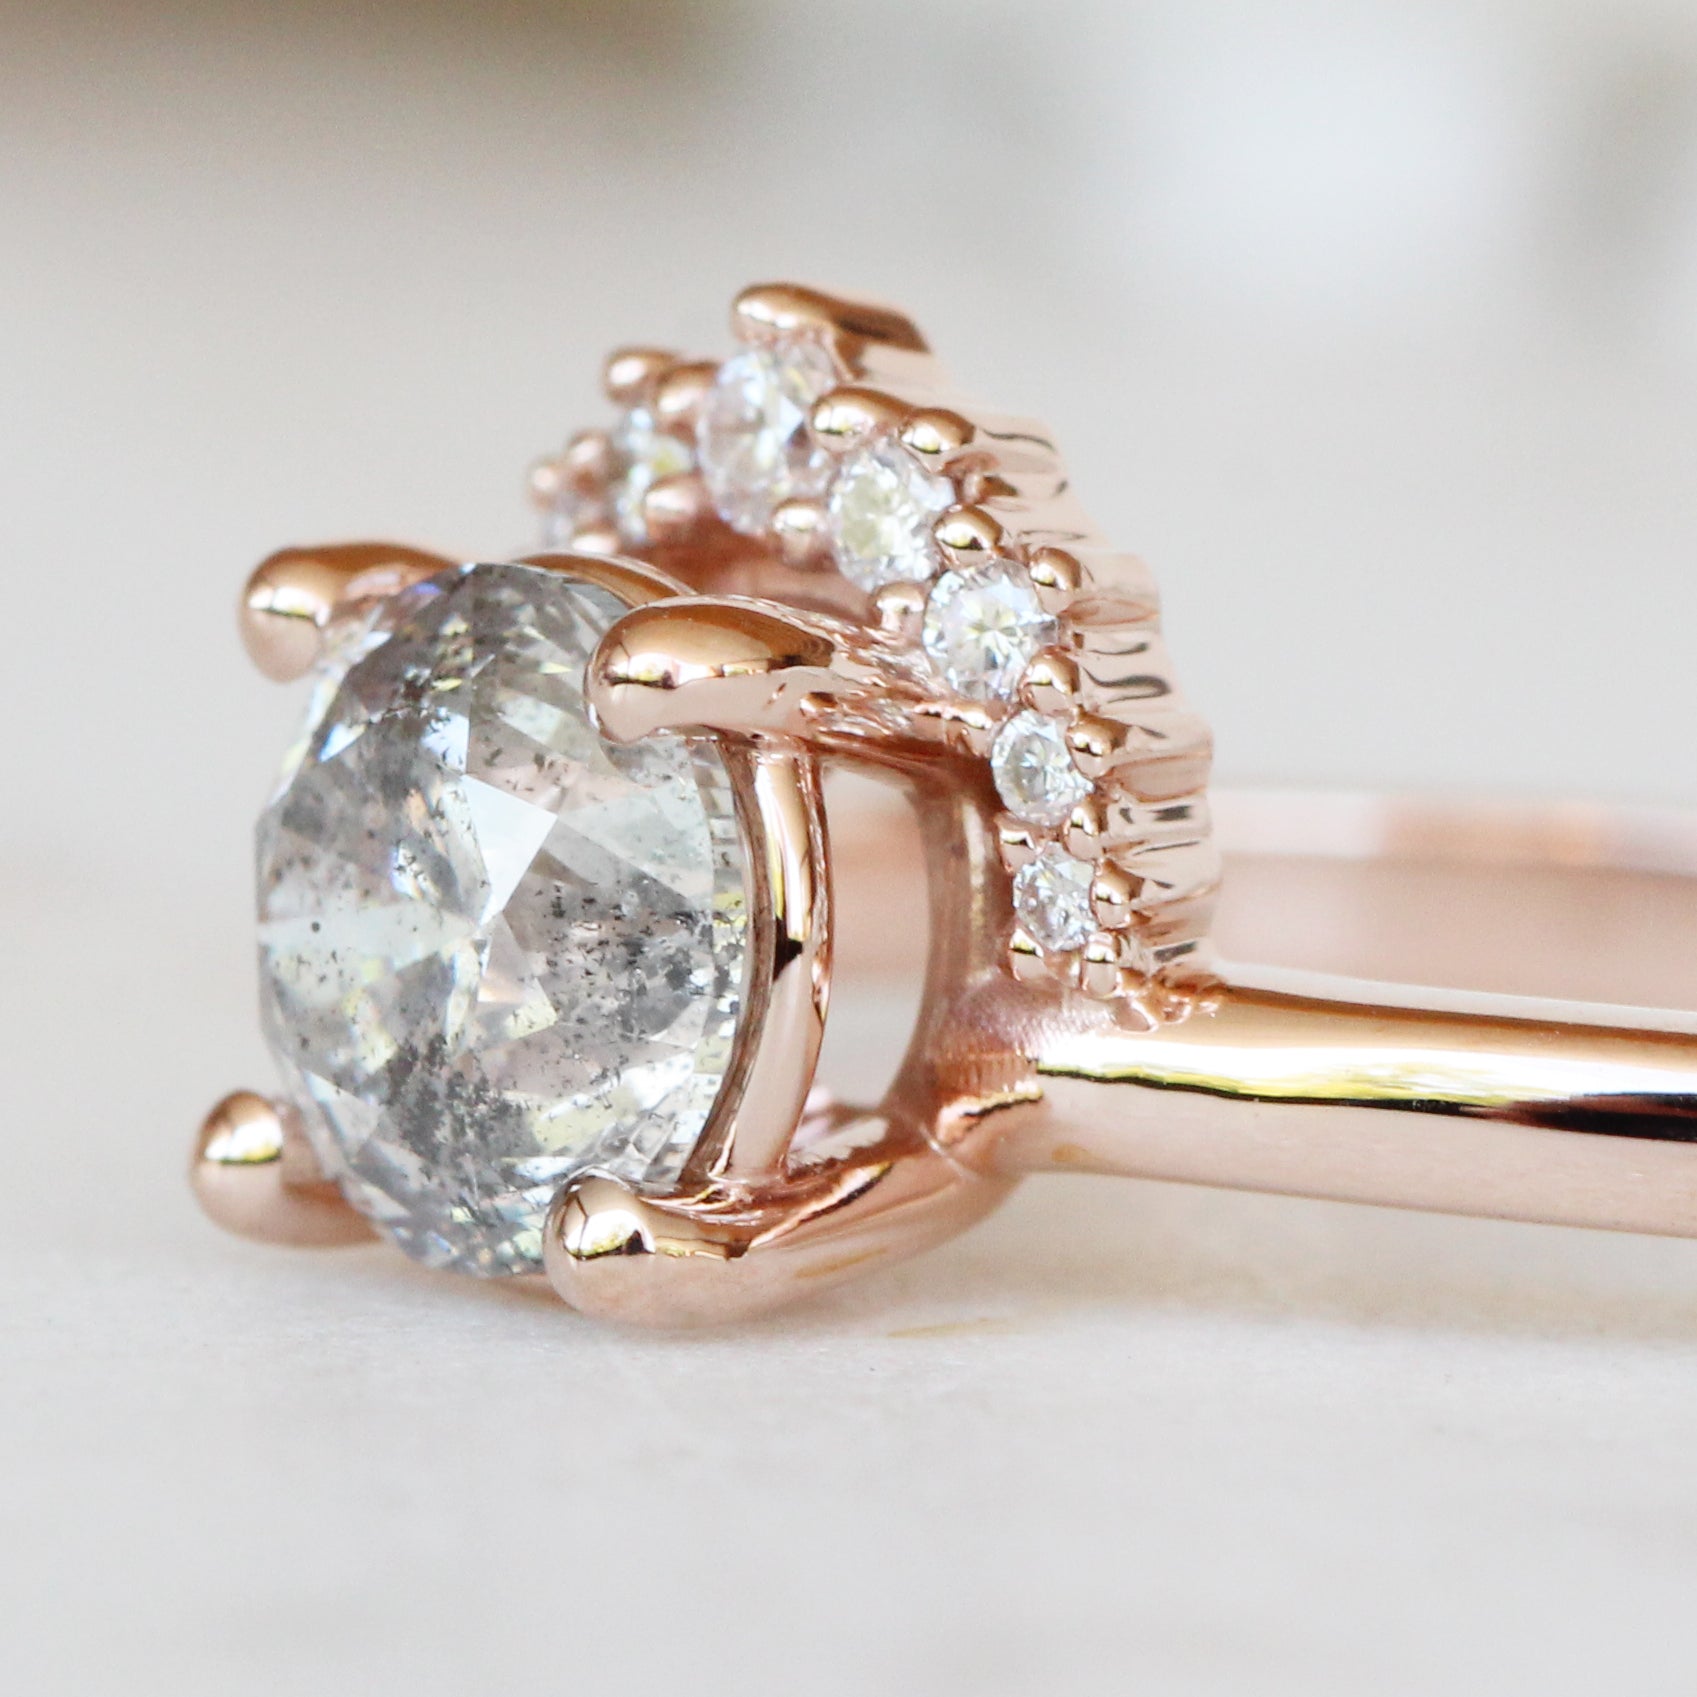 Lonnie Ring with a 1.01 Carat Round Celestial Diamond in 10k Rose Gold - Ready to Size and Ship - Midwinter Co. Alternative Bridal Rings and Modern Fine Jewelry